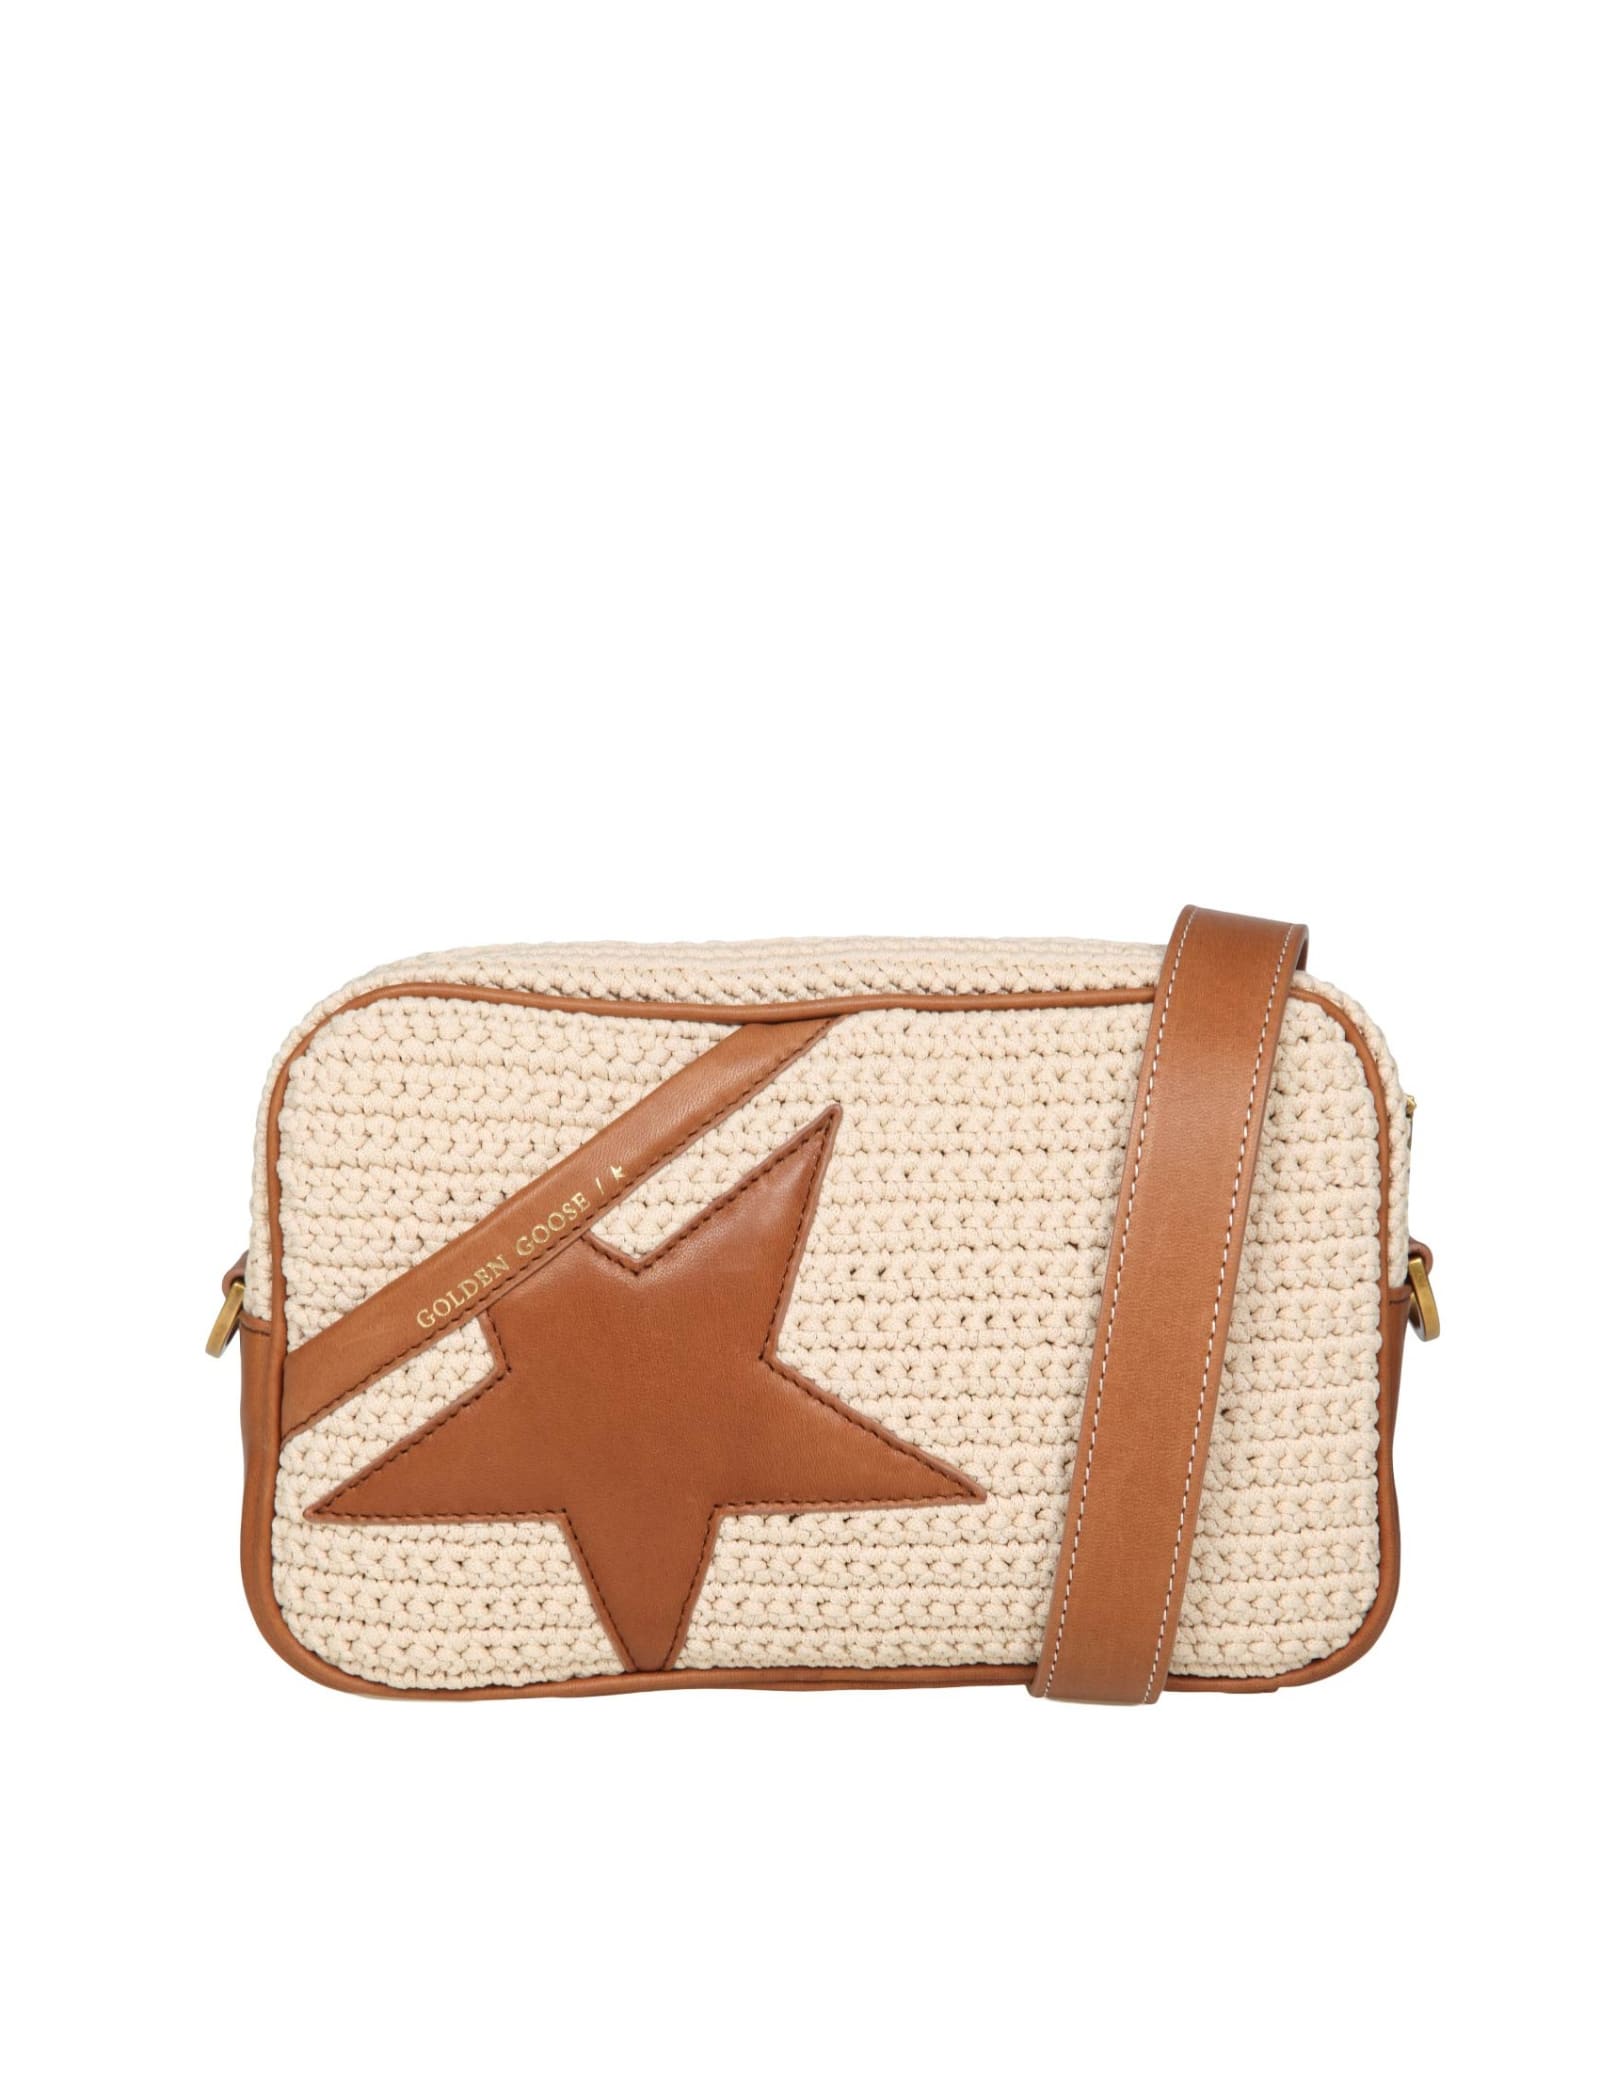 GOLDEN GOOSE GOLDEN GOOSE STAR BAG IN CROCHET FABRIC AND LEATHER